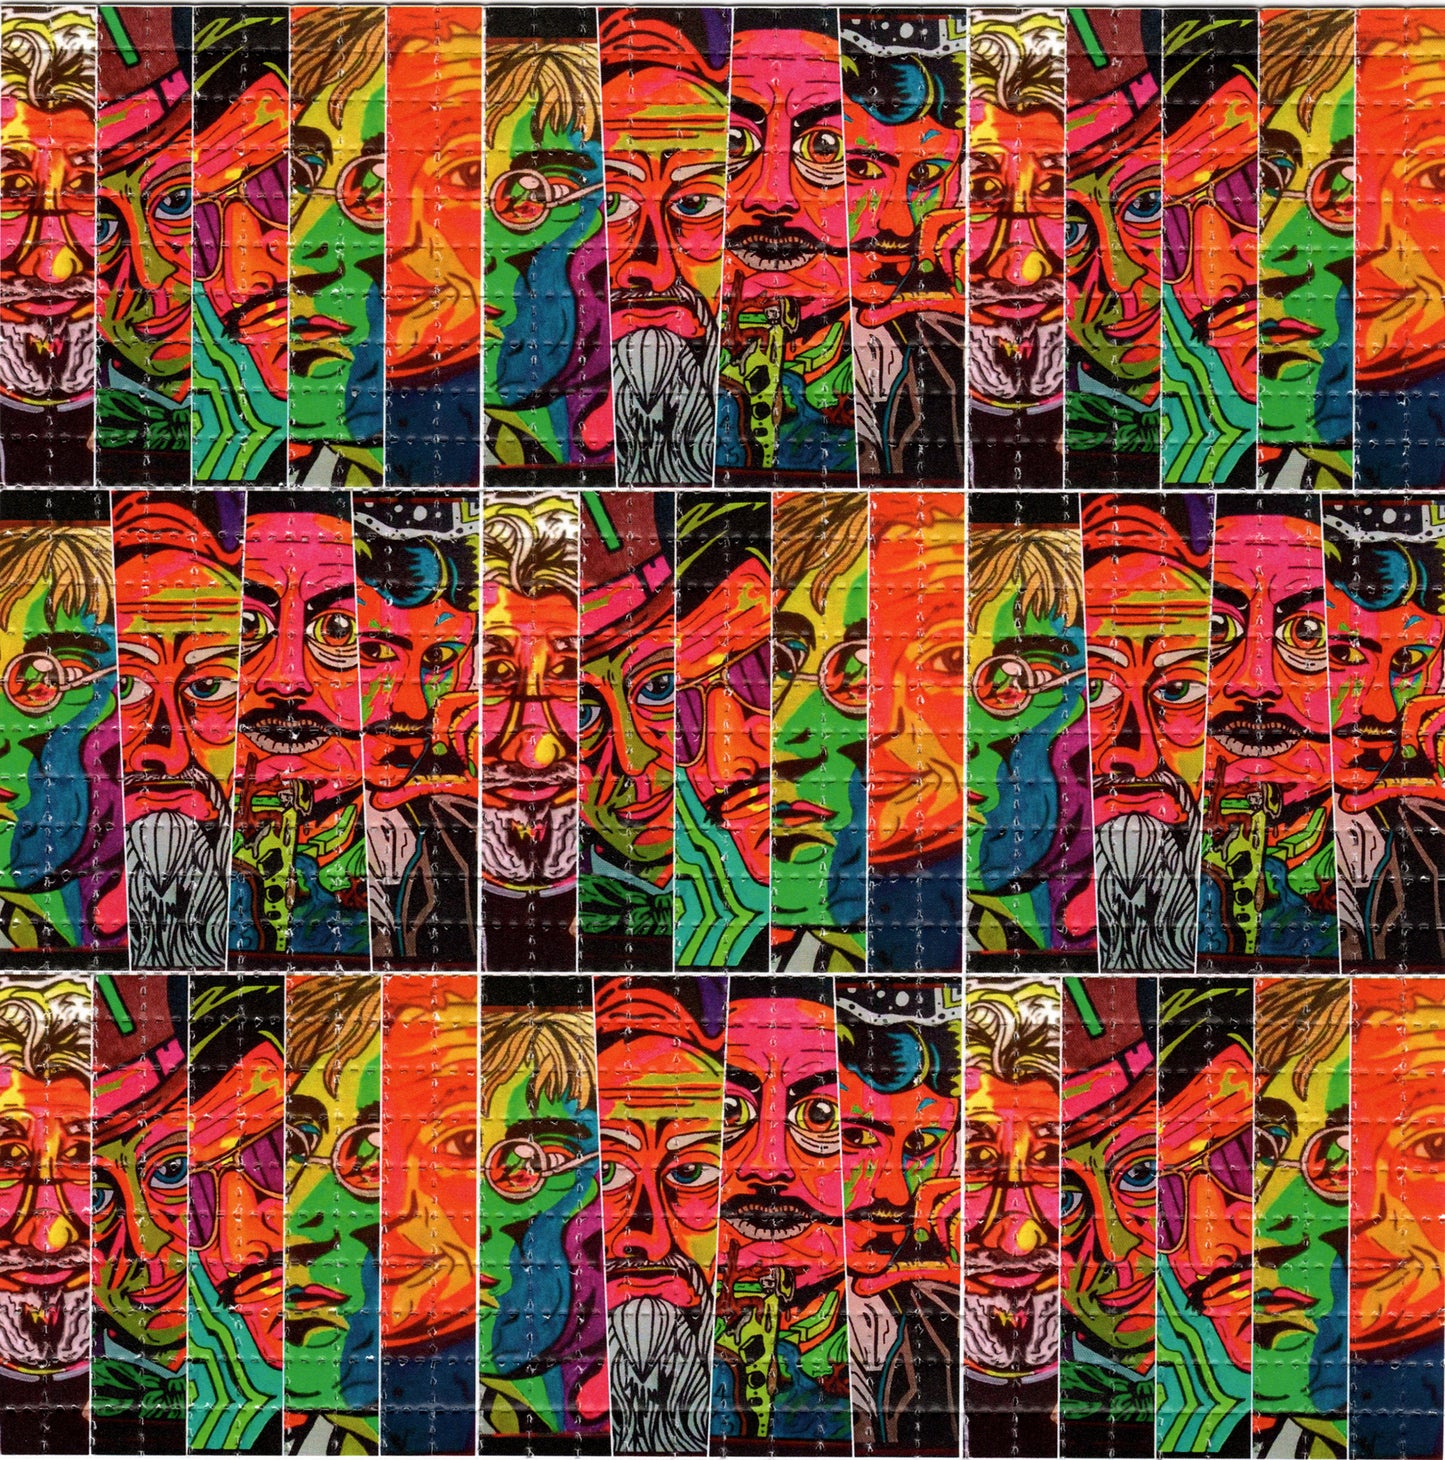 Thin Faces by Crisis Chris Signed Limited Edition LSD blotter art print